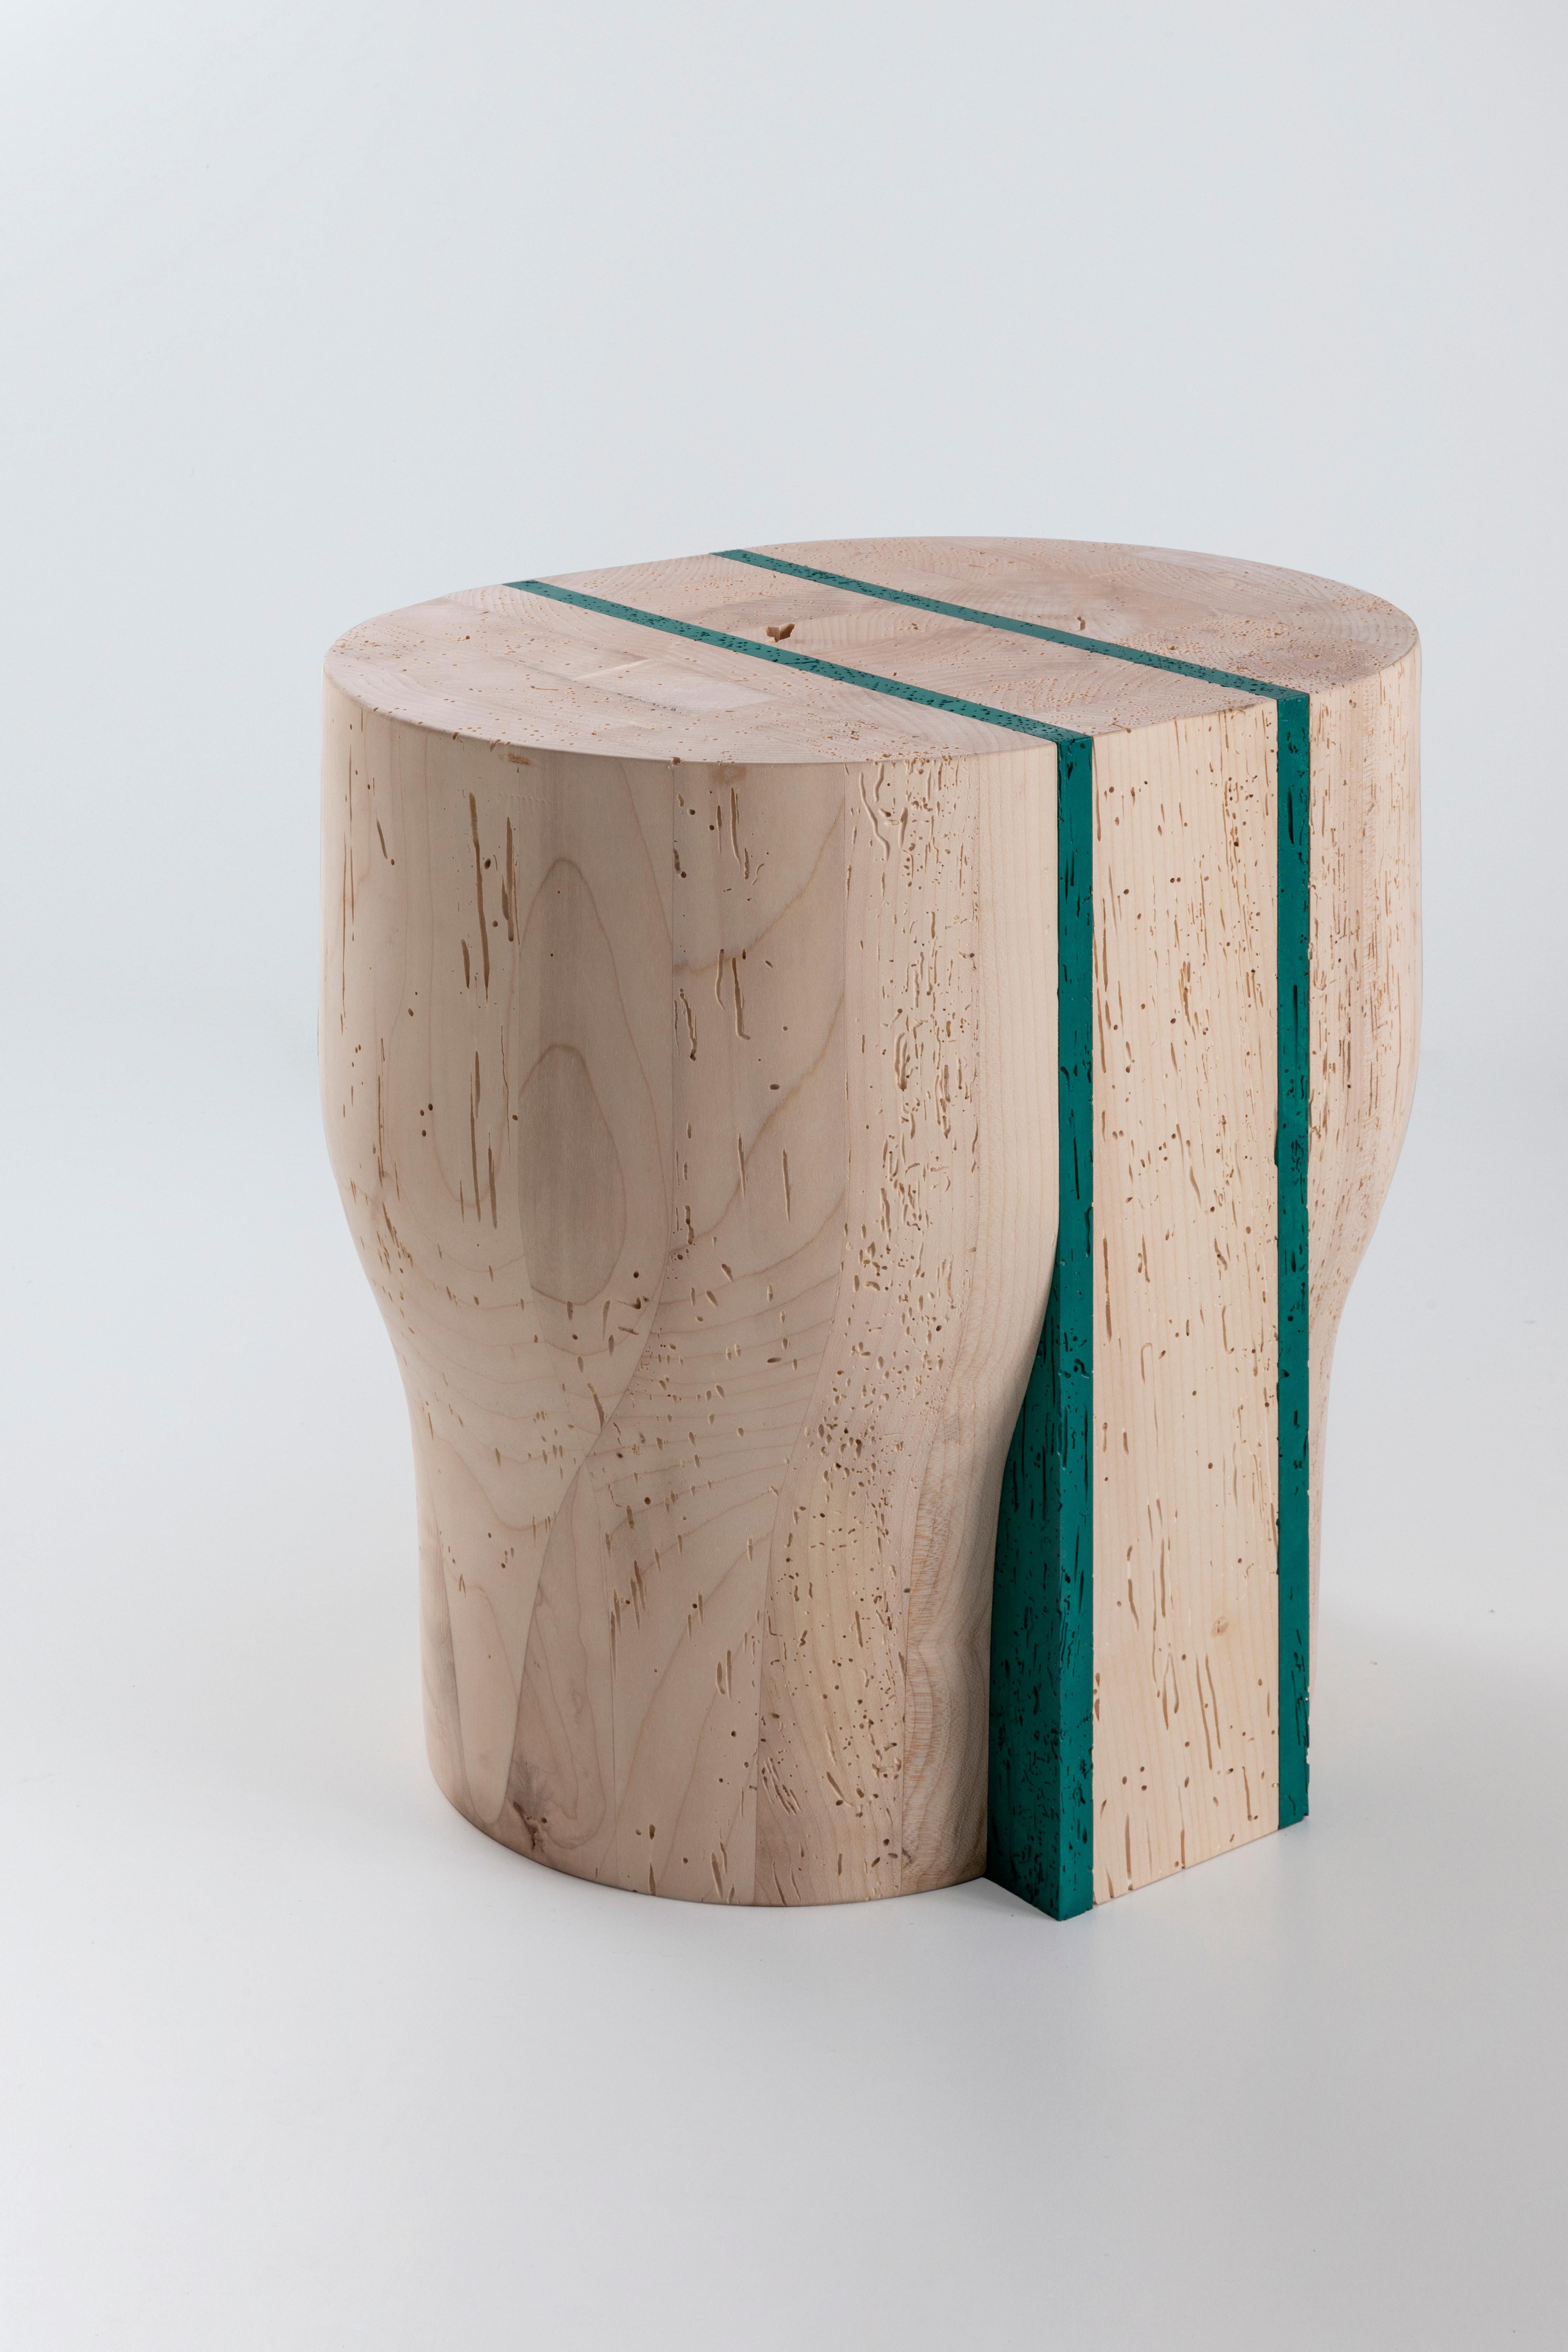 Jeunesse n.3 stool and side table made in recovered maple wood is part of Jeunesse Collection designed by Duccio Maria Gambi. This collection is composed of three works that explore the relationship between two elements, a solid mass of reclaimed